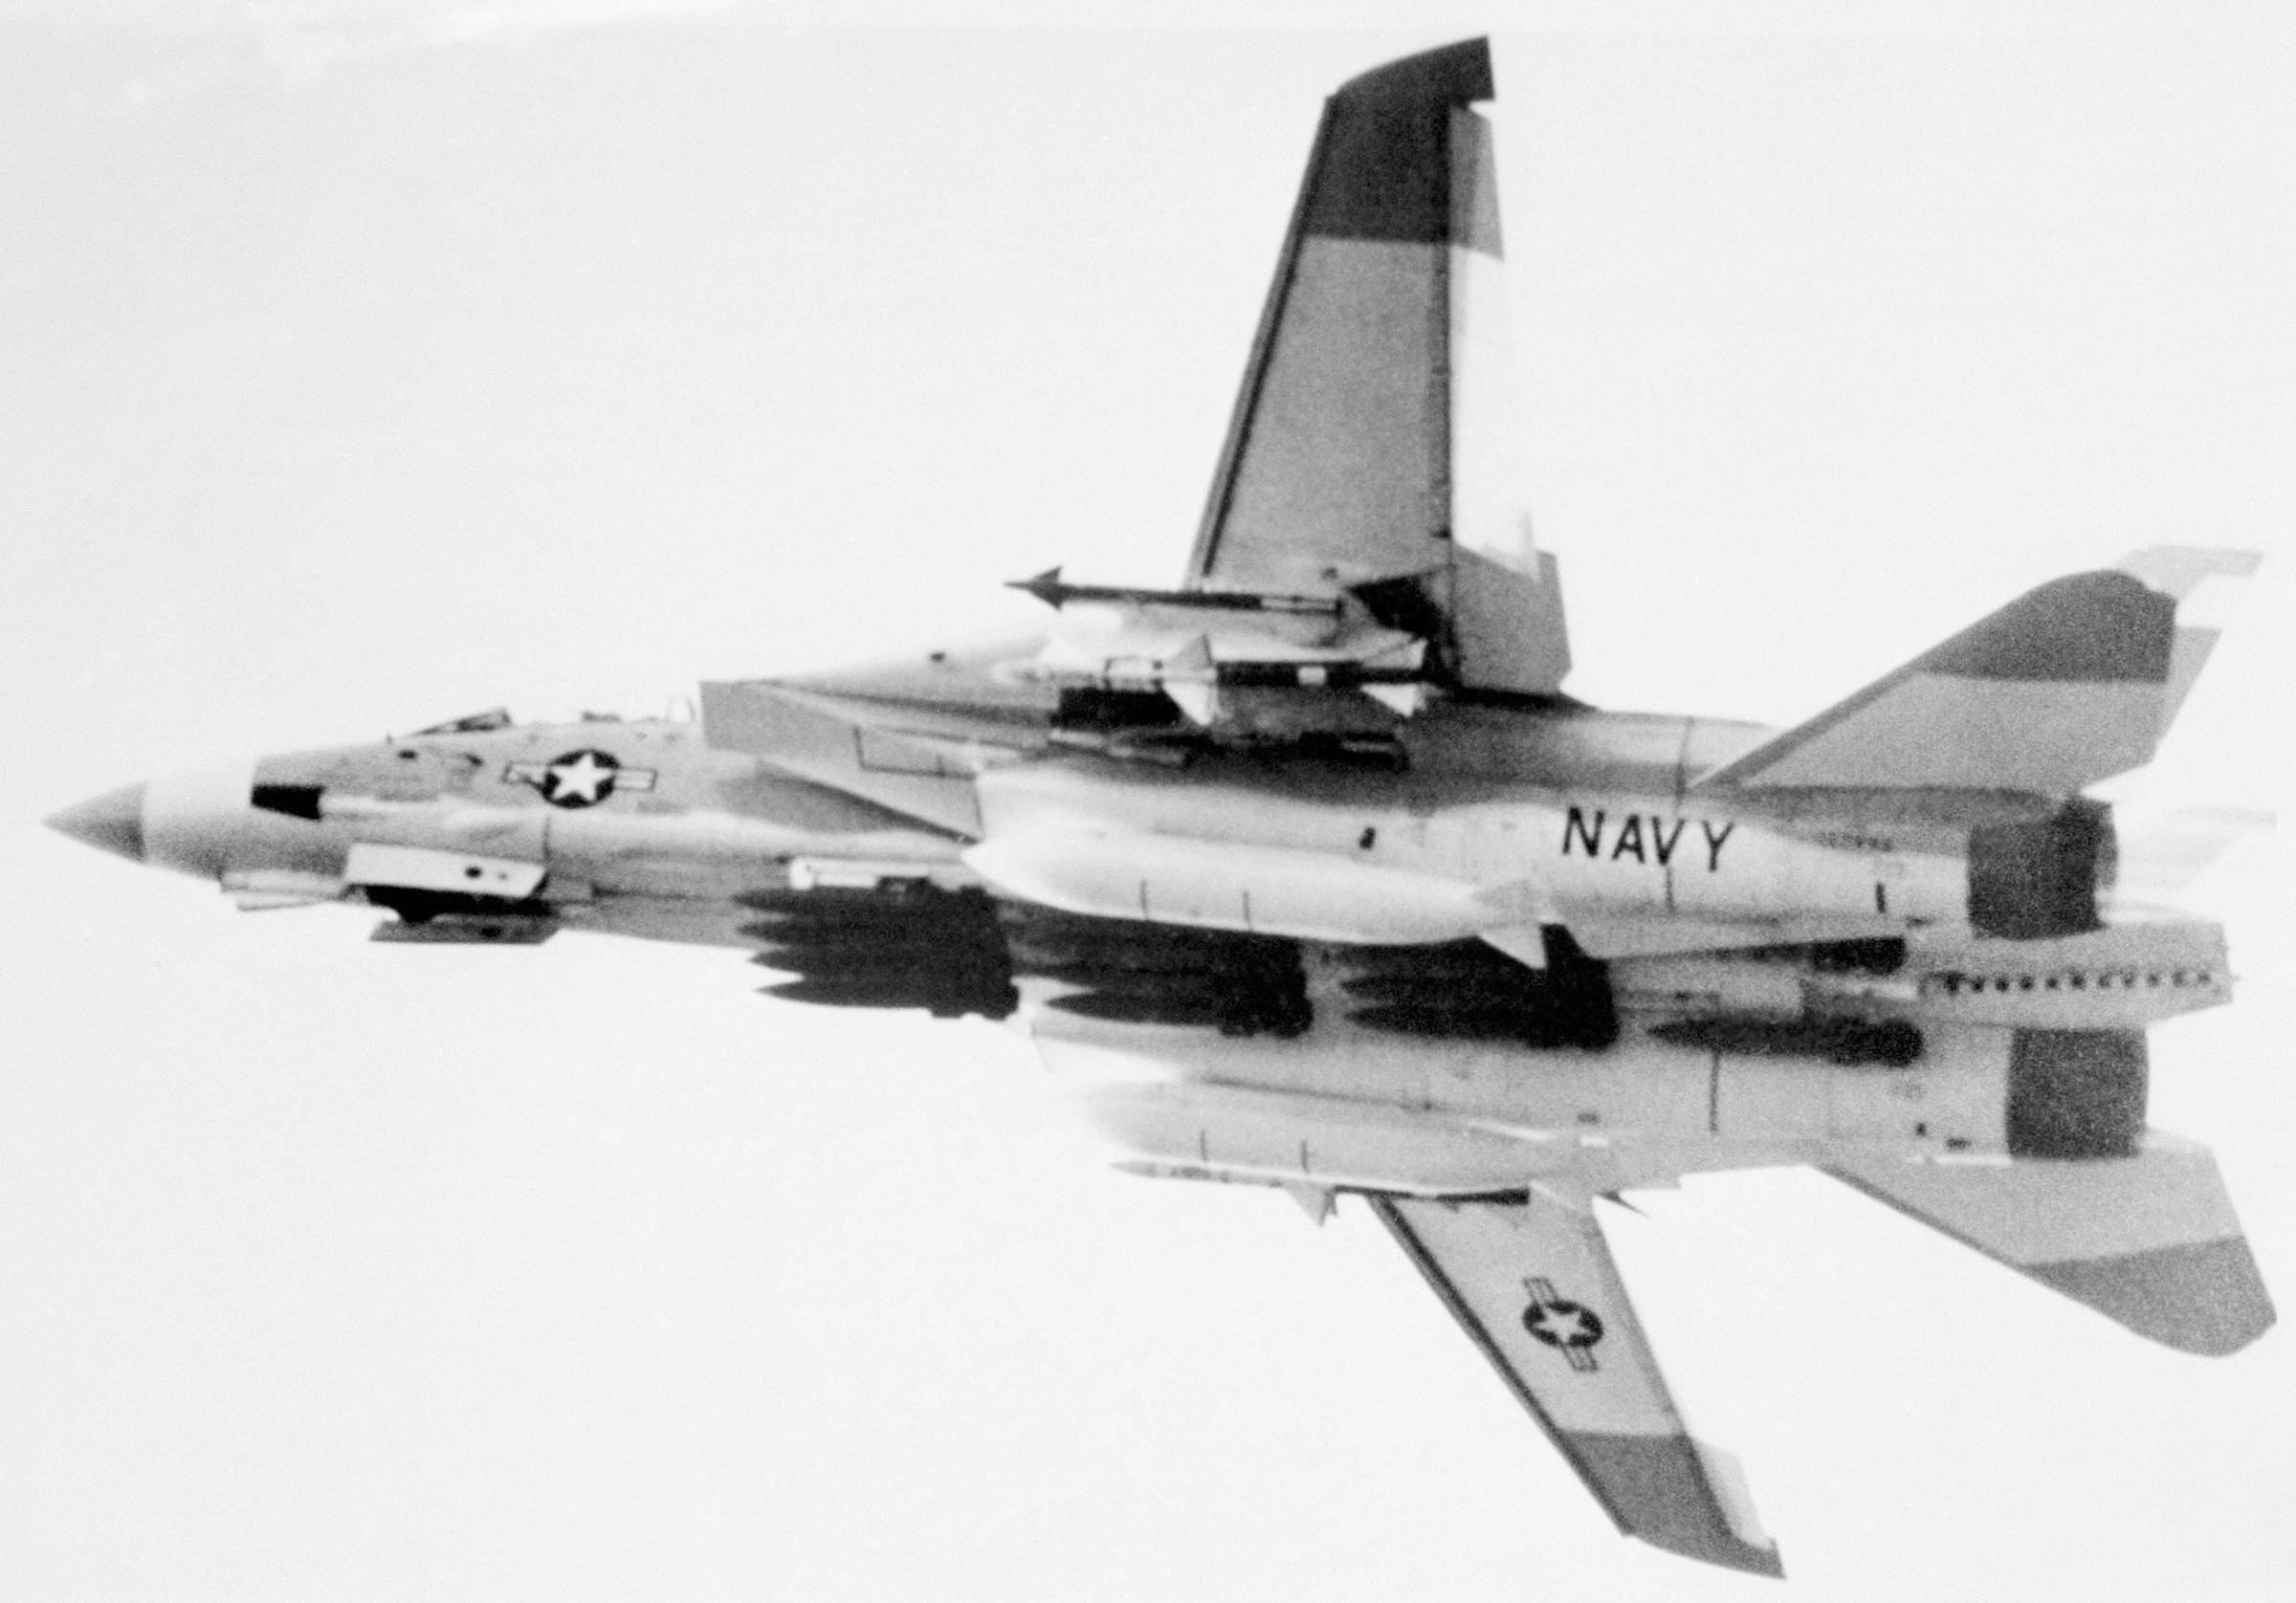 vf-24 fighting renegades fighter squadron navy f-14a tomcat aim-9 sidewinder aim-7 sparrow missile bombs 24